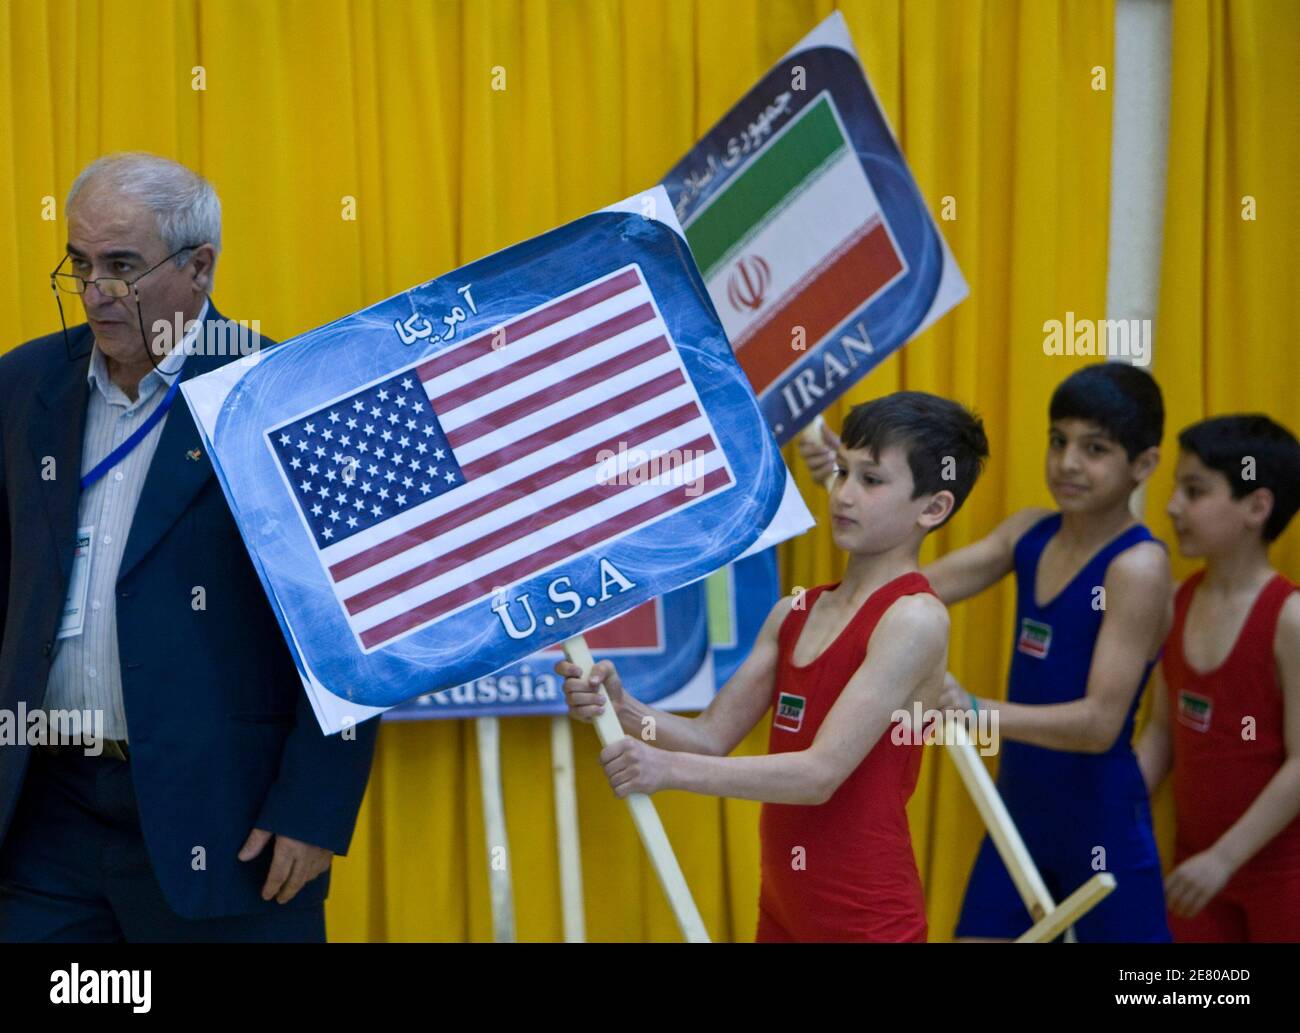 Iranian boys carry placards of Iran and United States during the opening ceremony of the 29th Takhti Free Style Wrestling Tournament in Tehran March 12, 2009. REUTERS/Raheb Homavandi (IRAN SPORT WRESTLING POLITICS) Stock Photo